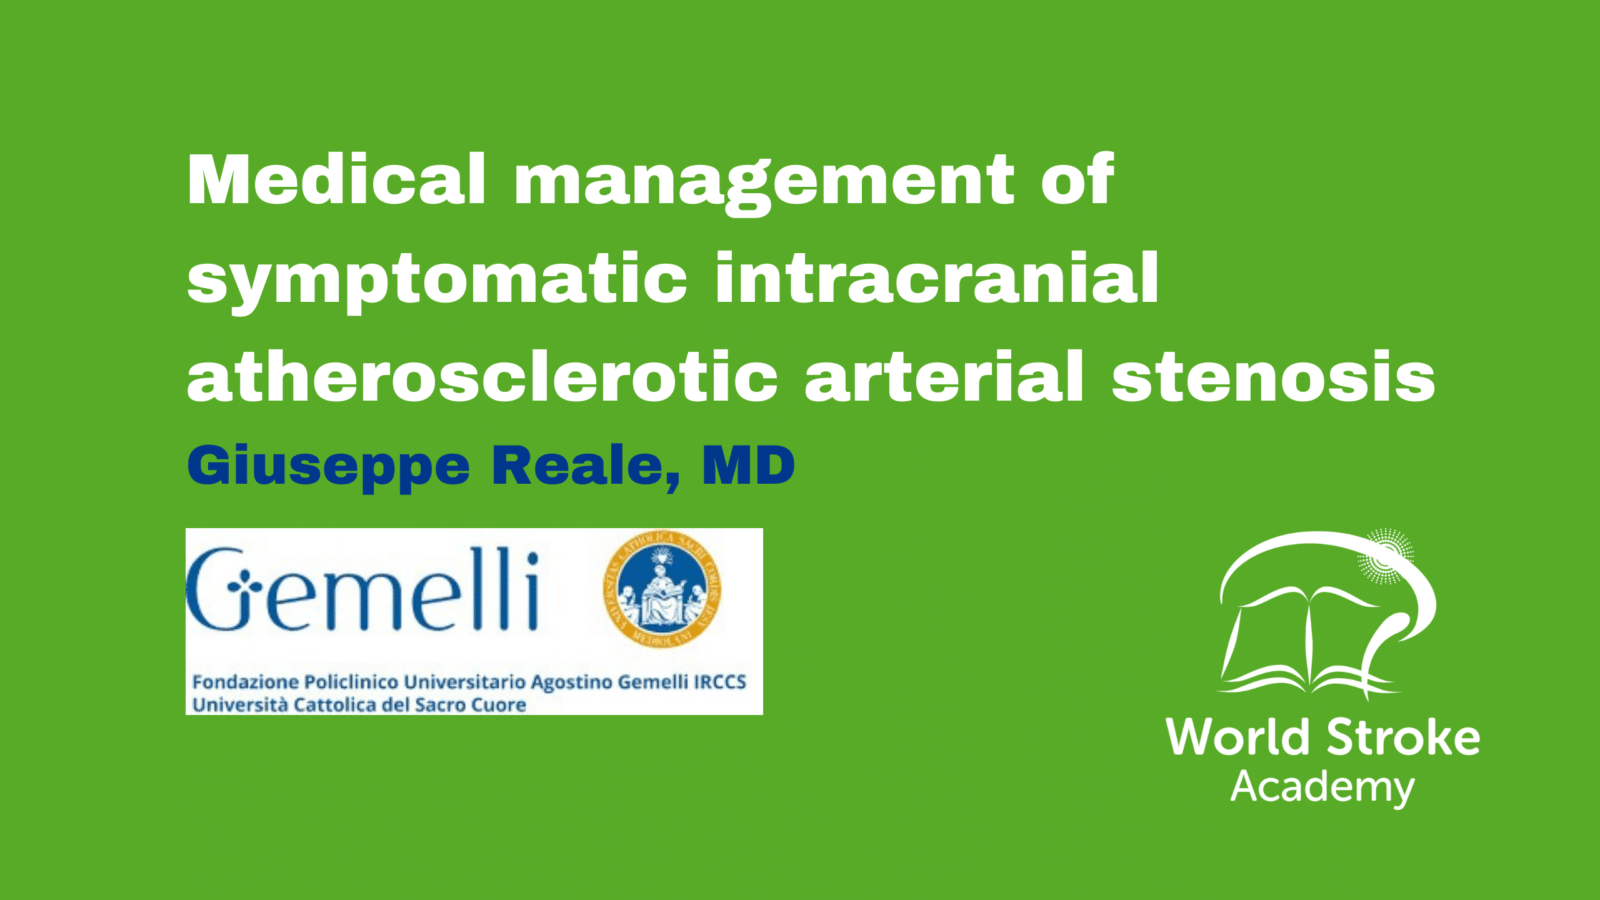 Medical management of symptomatic intracranial atherosclerotic arterial stenosis